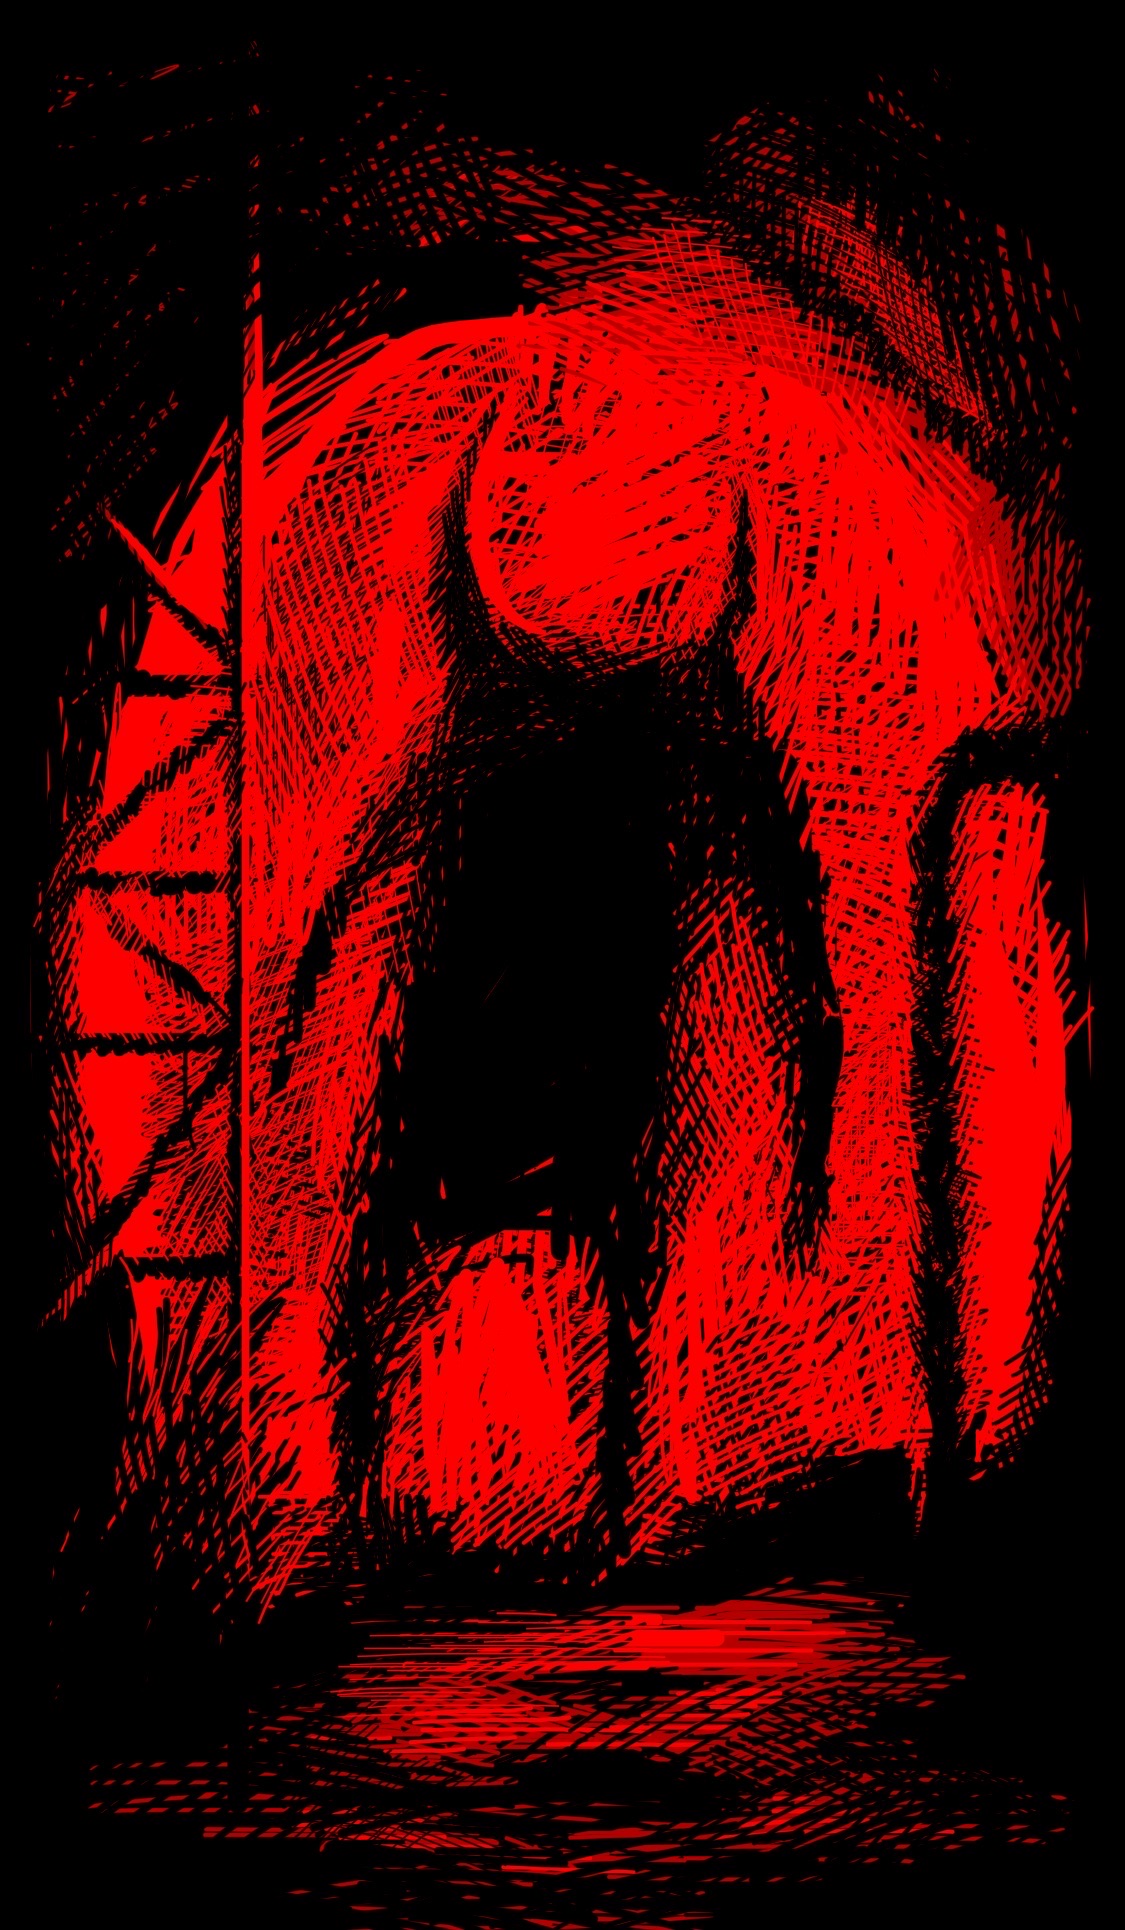 A horned creature stands framed in a large red cave entrance